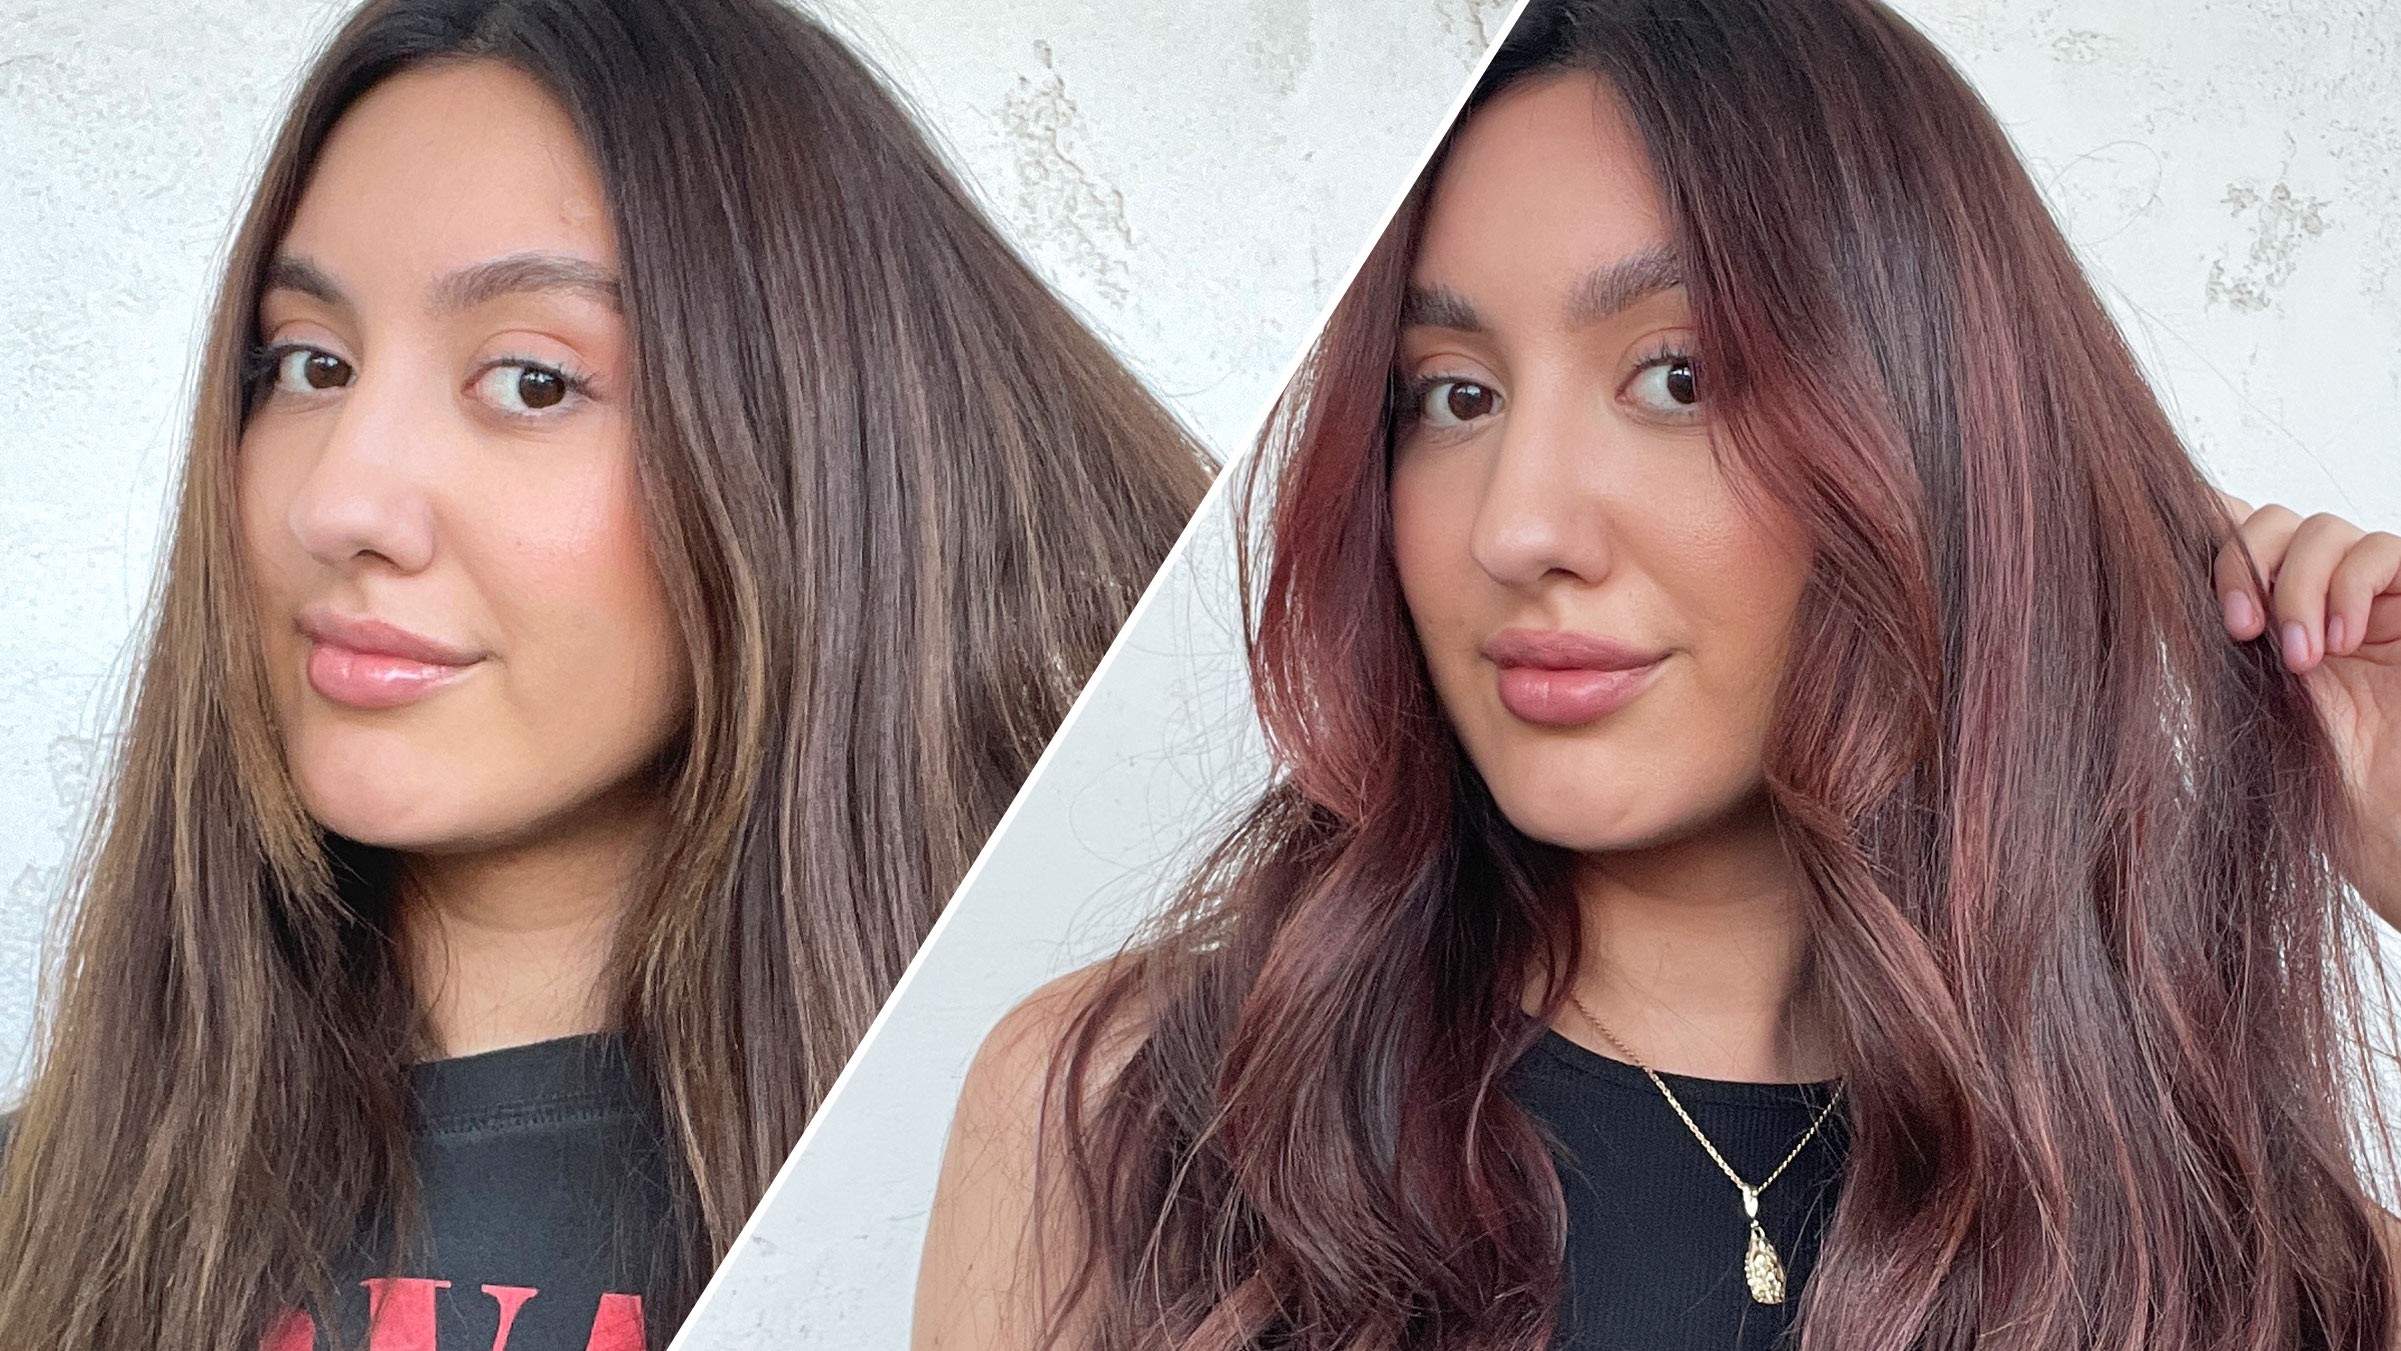 Pinot Noir Hair — The Wine Color Everyone Loves